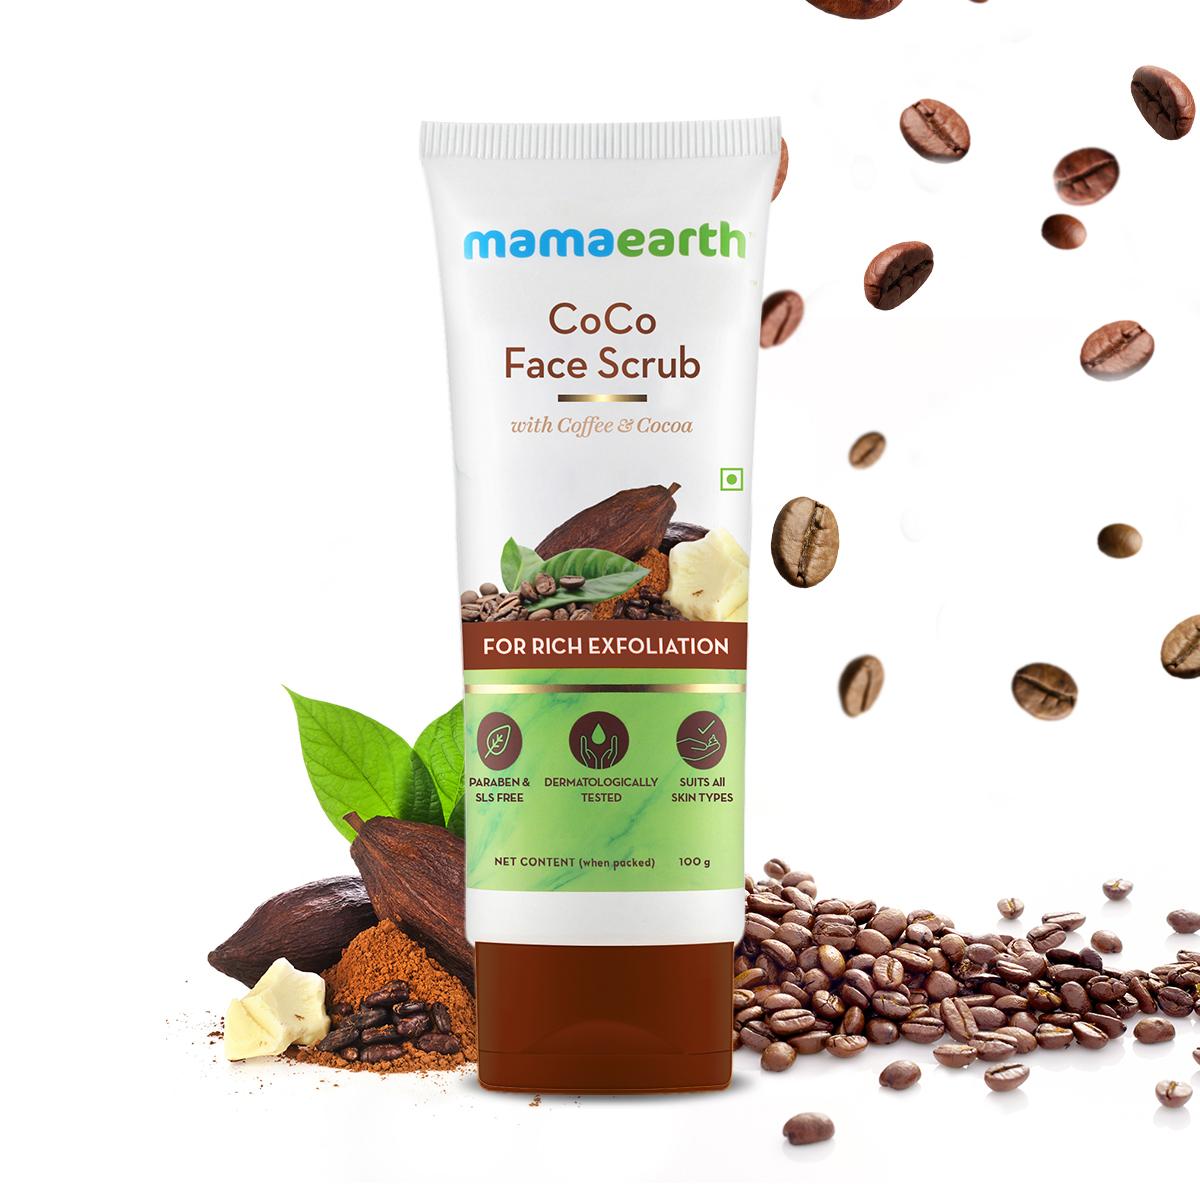 coco-face-scrub-with-coffee-and-cocoa-for-rich-exfoliation---100g